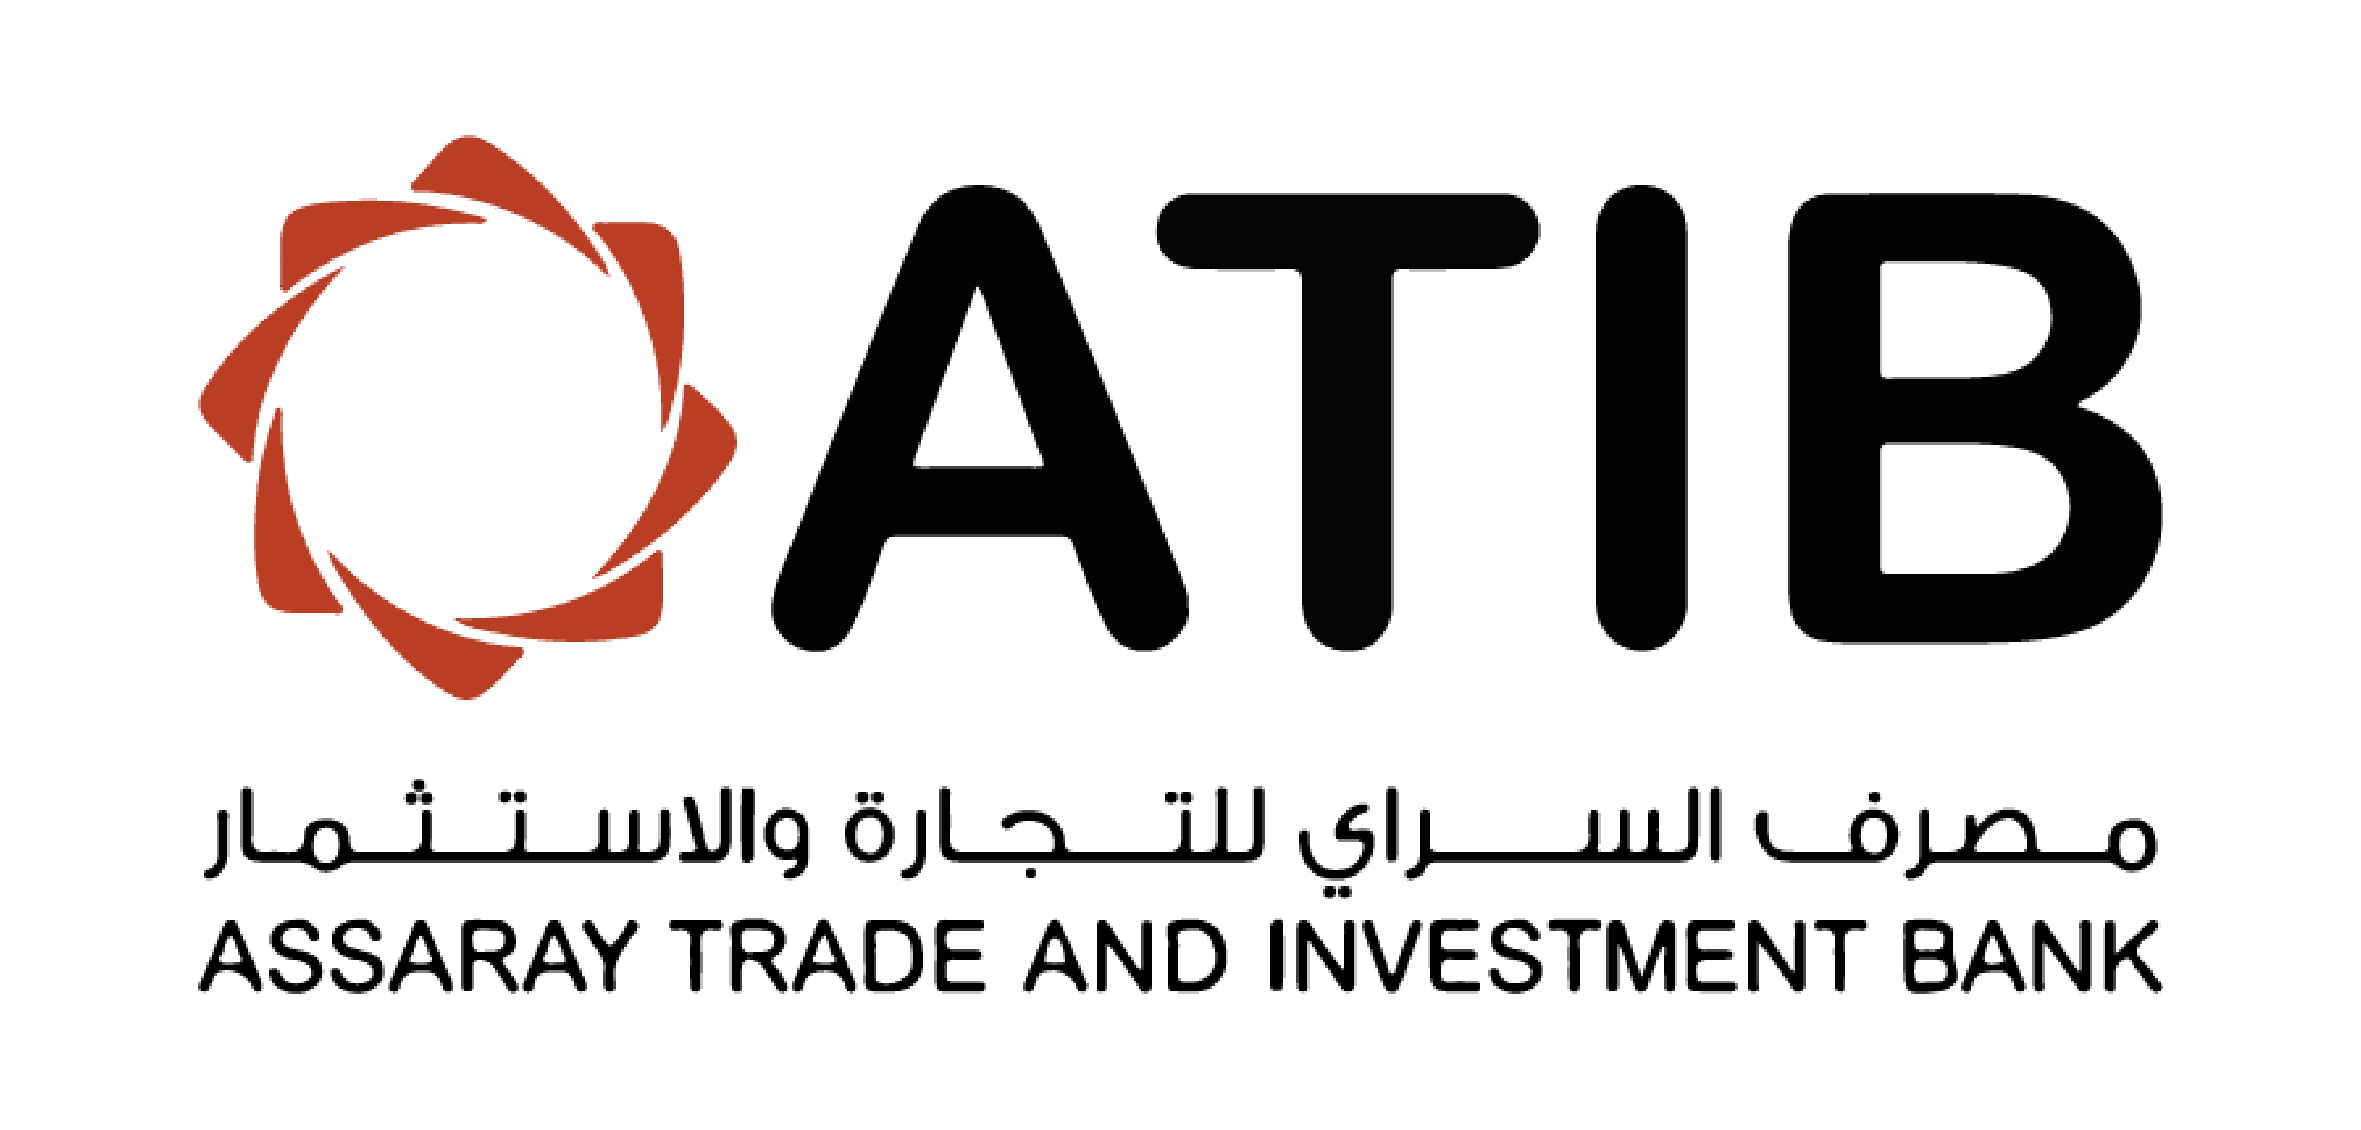 Assaray Trade and Investment Bank